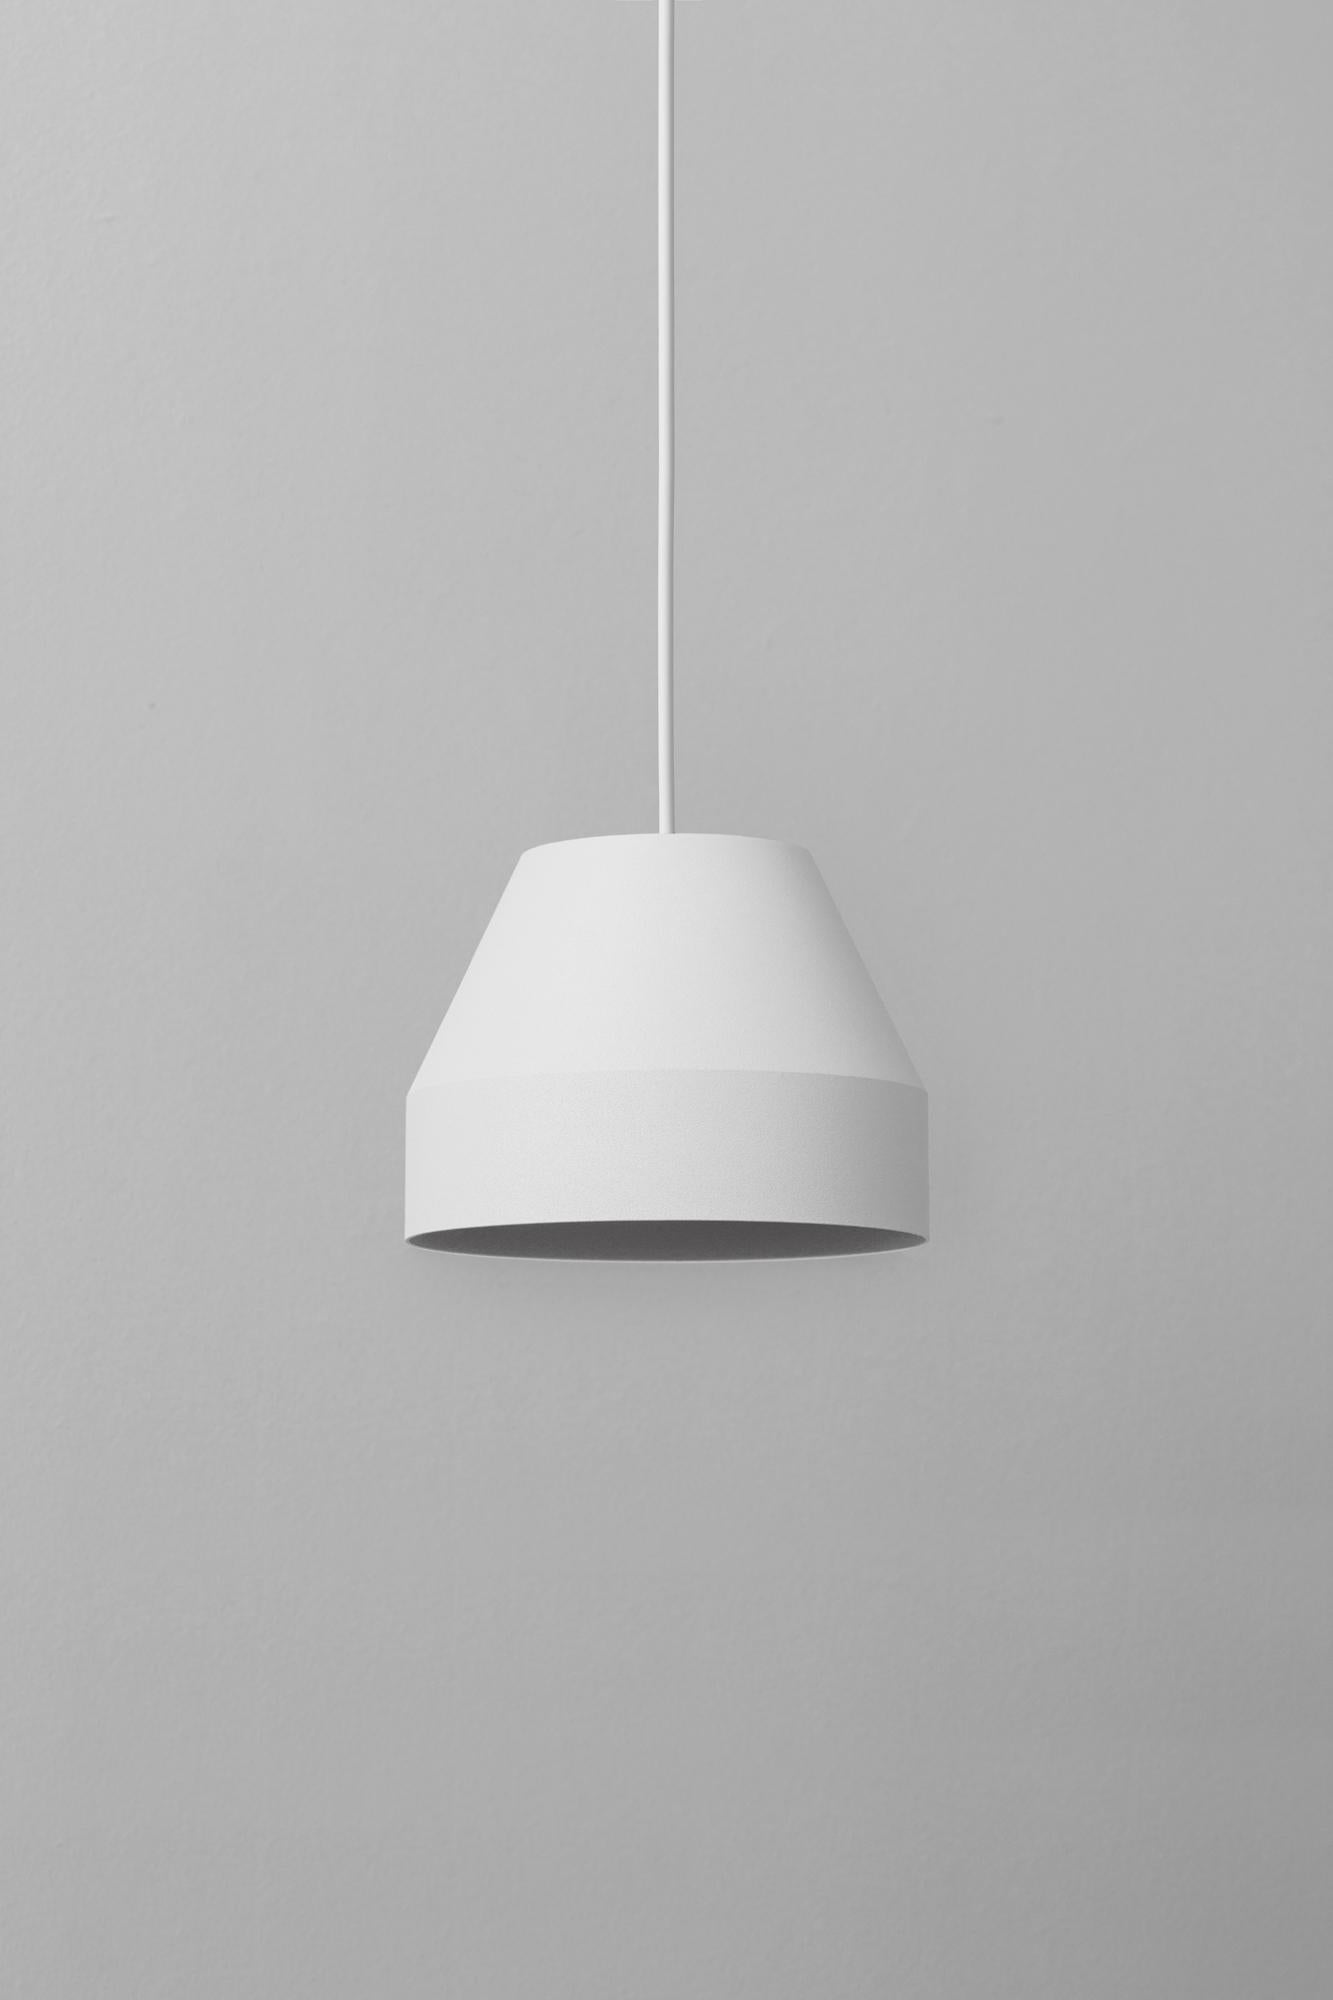 Small White Cap Pendant Lamp by +kouple
Dimensions: Ø 16 x H 12 cm. 
Materials: Powder-coated steel.

Available in different color options. The rod length is 200 cm. Please contact us.

All our lamps can be wired according to each country. If sold